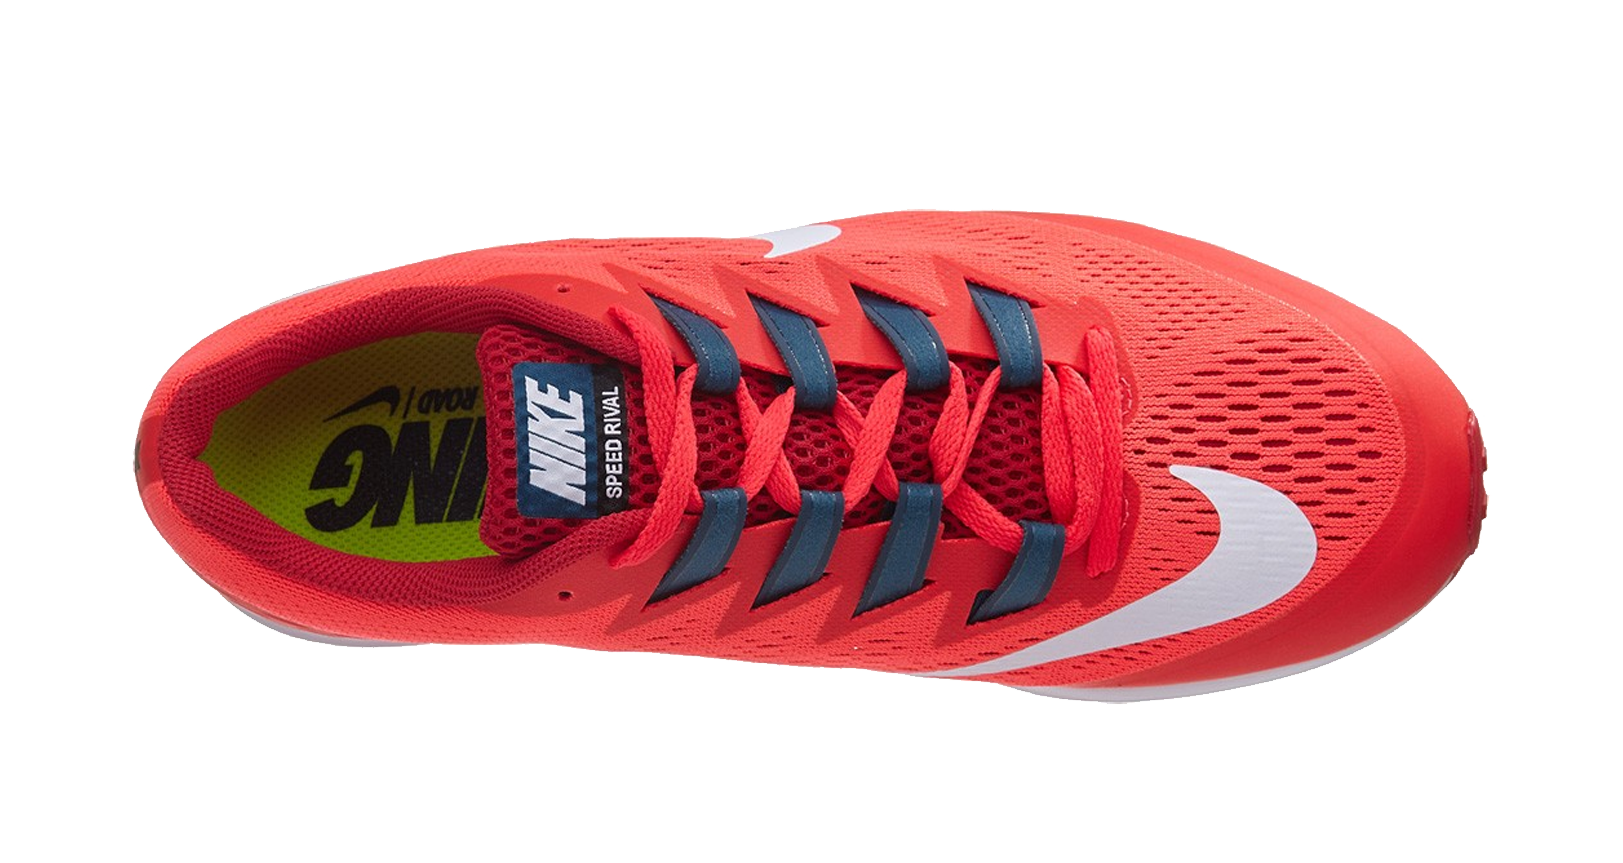 Zoom Speed Rival Running Shoe Review - Believe the Run